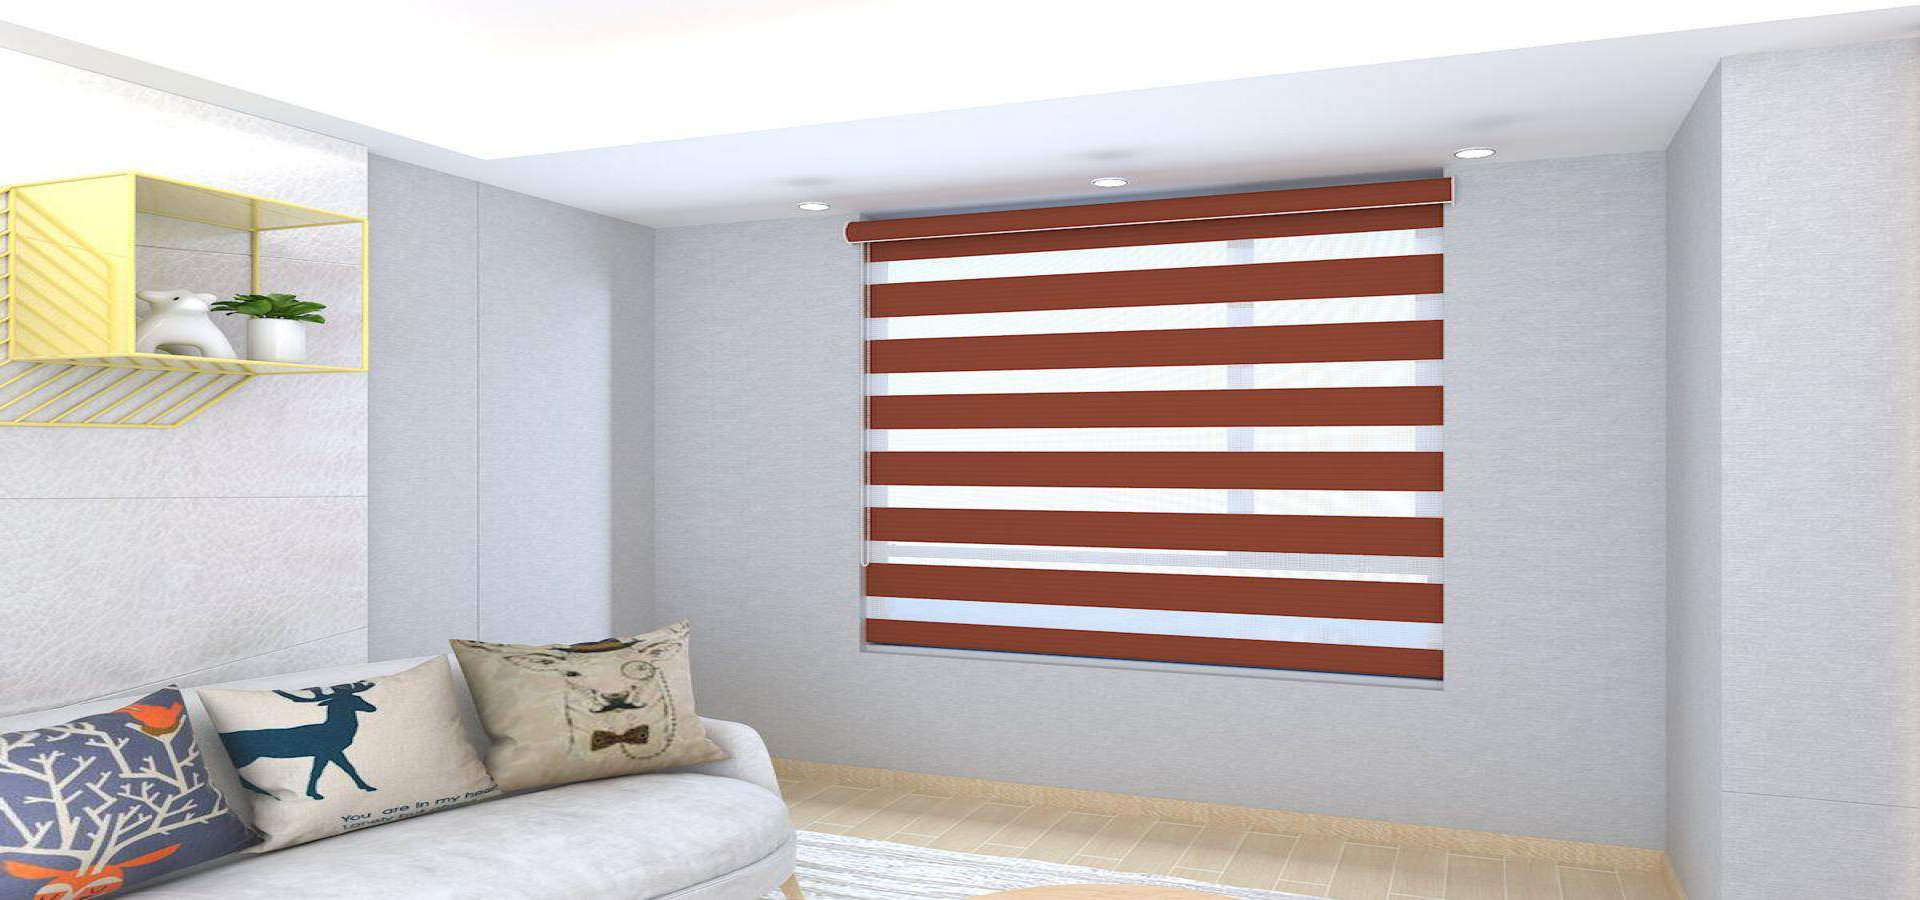 See Your Room In A New Light With Our Stylish Blinds